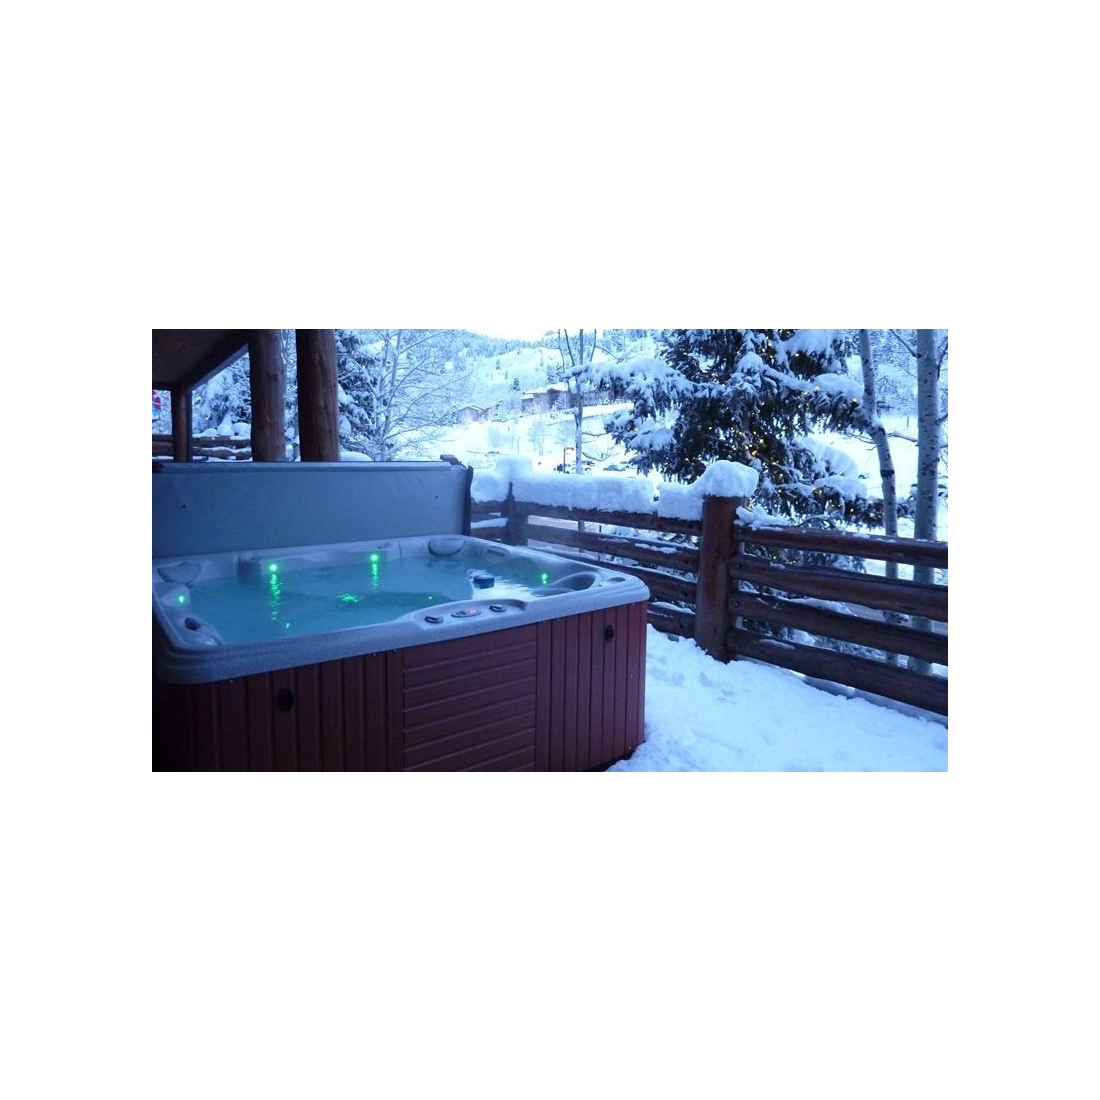 Get Your Hot Tub Ready For Winter